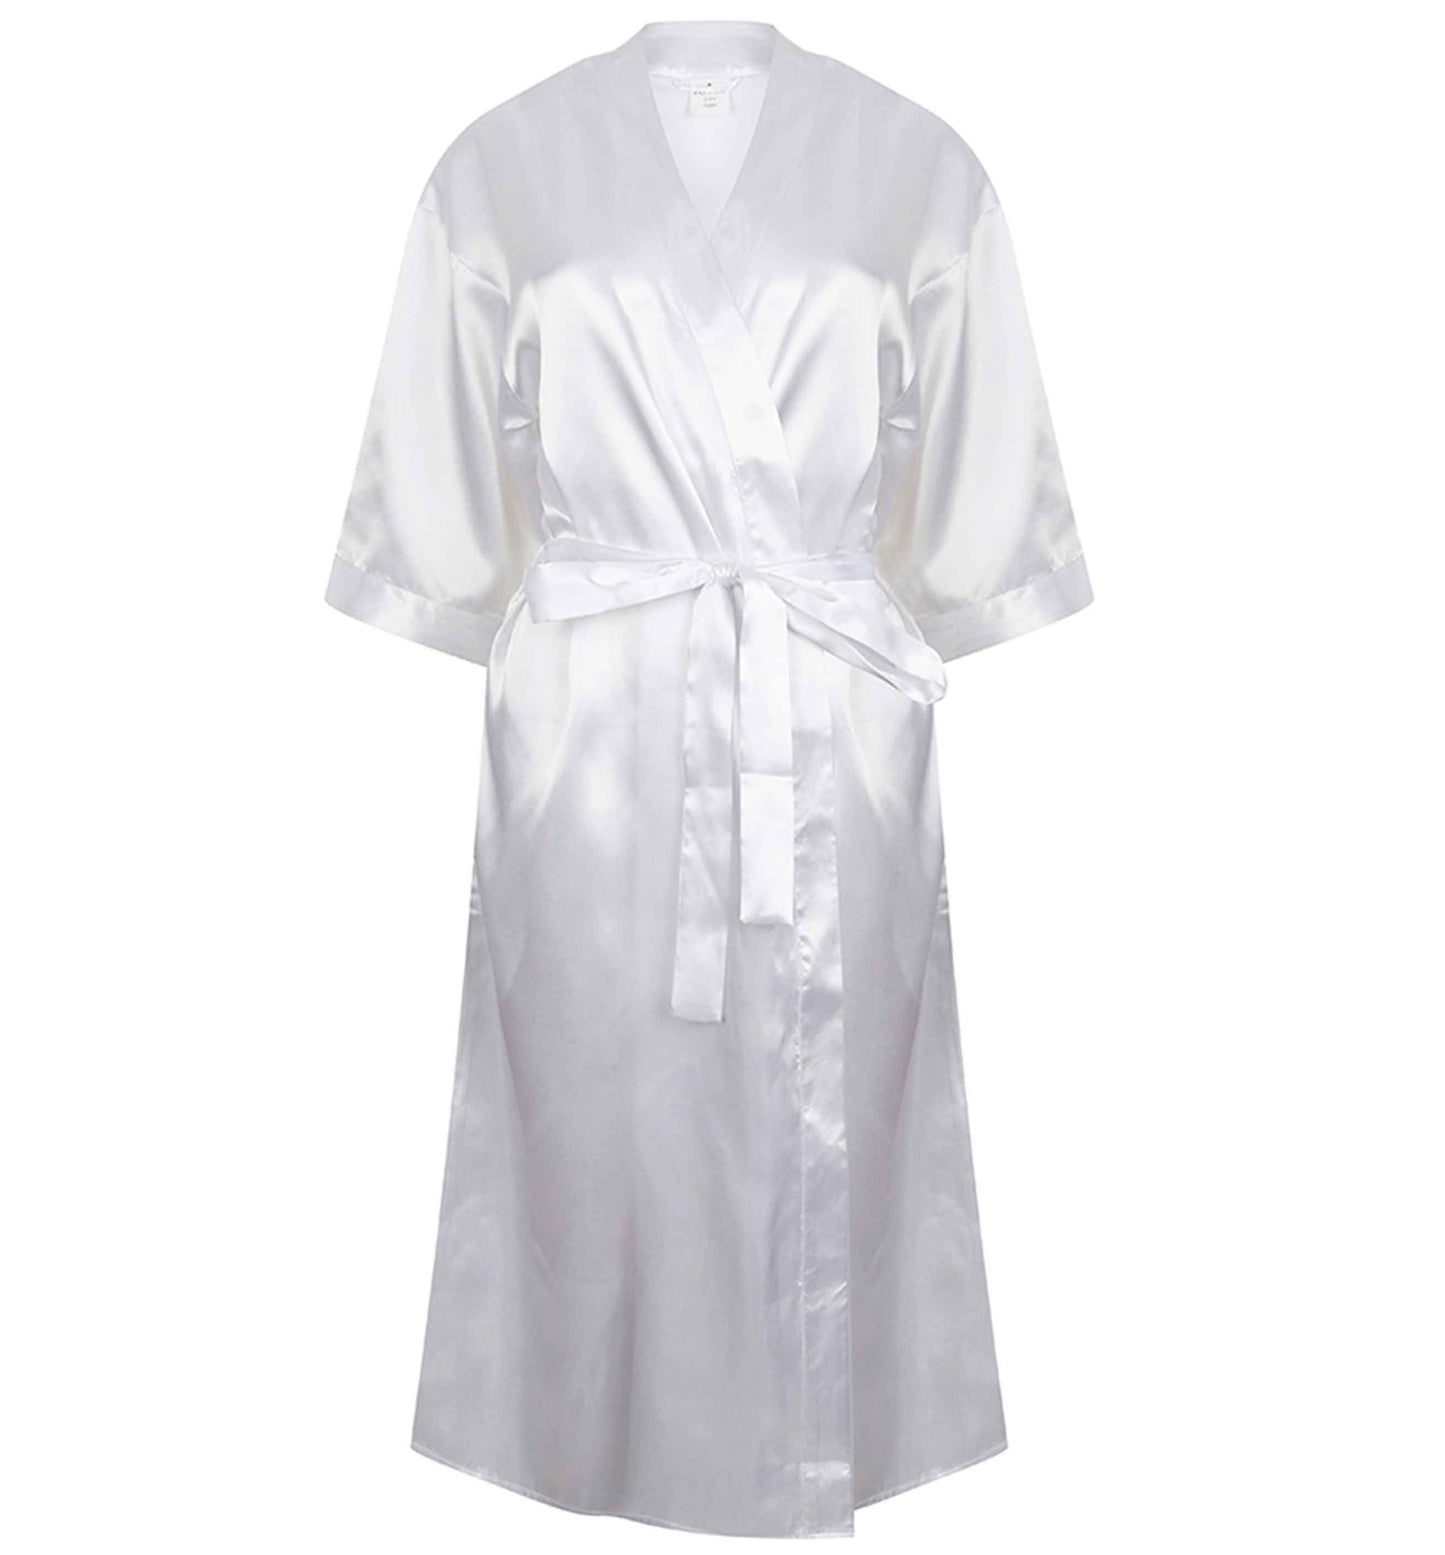 Don't worry I have everything under complete control | 8-18 | Kimono style satin robe | Ladies dressing gown